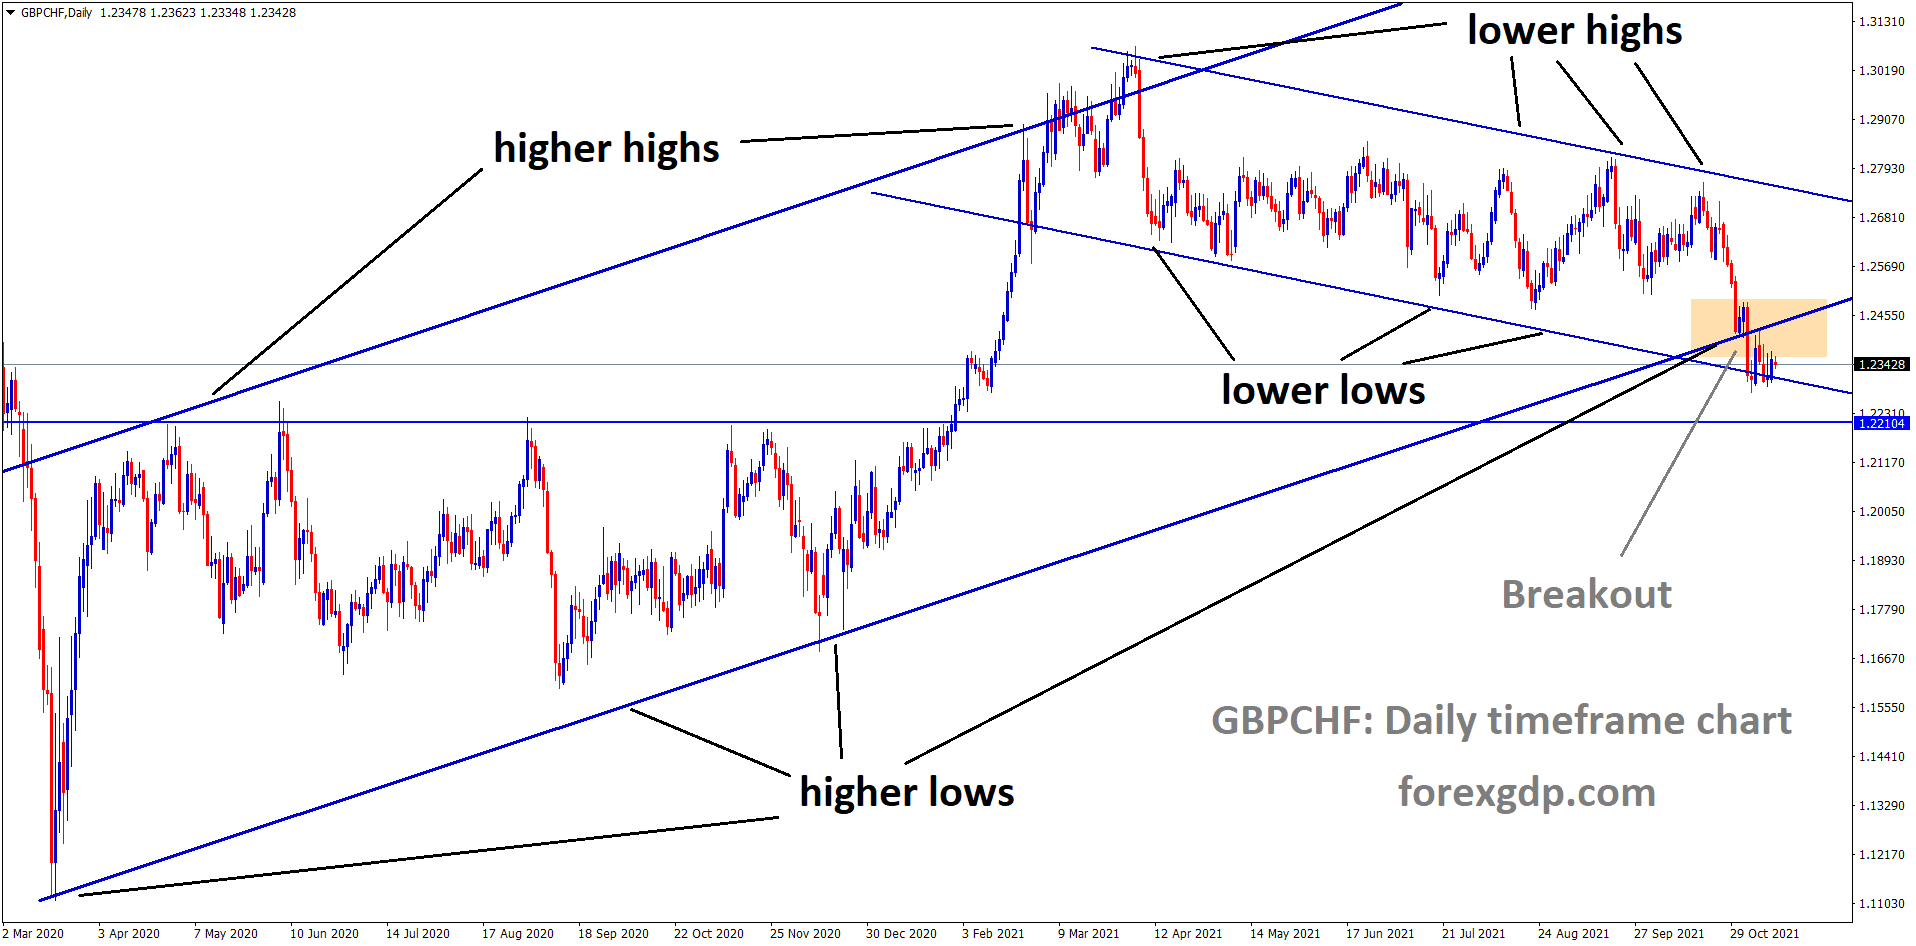 GBPCHF has broken the Major Ascending channel and the market now stands at the lower low